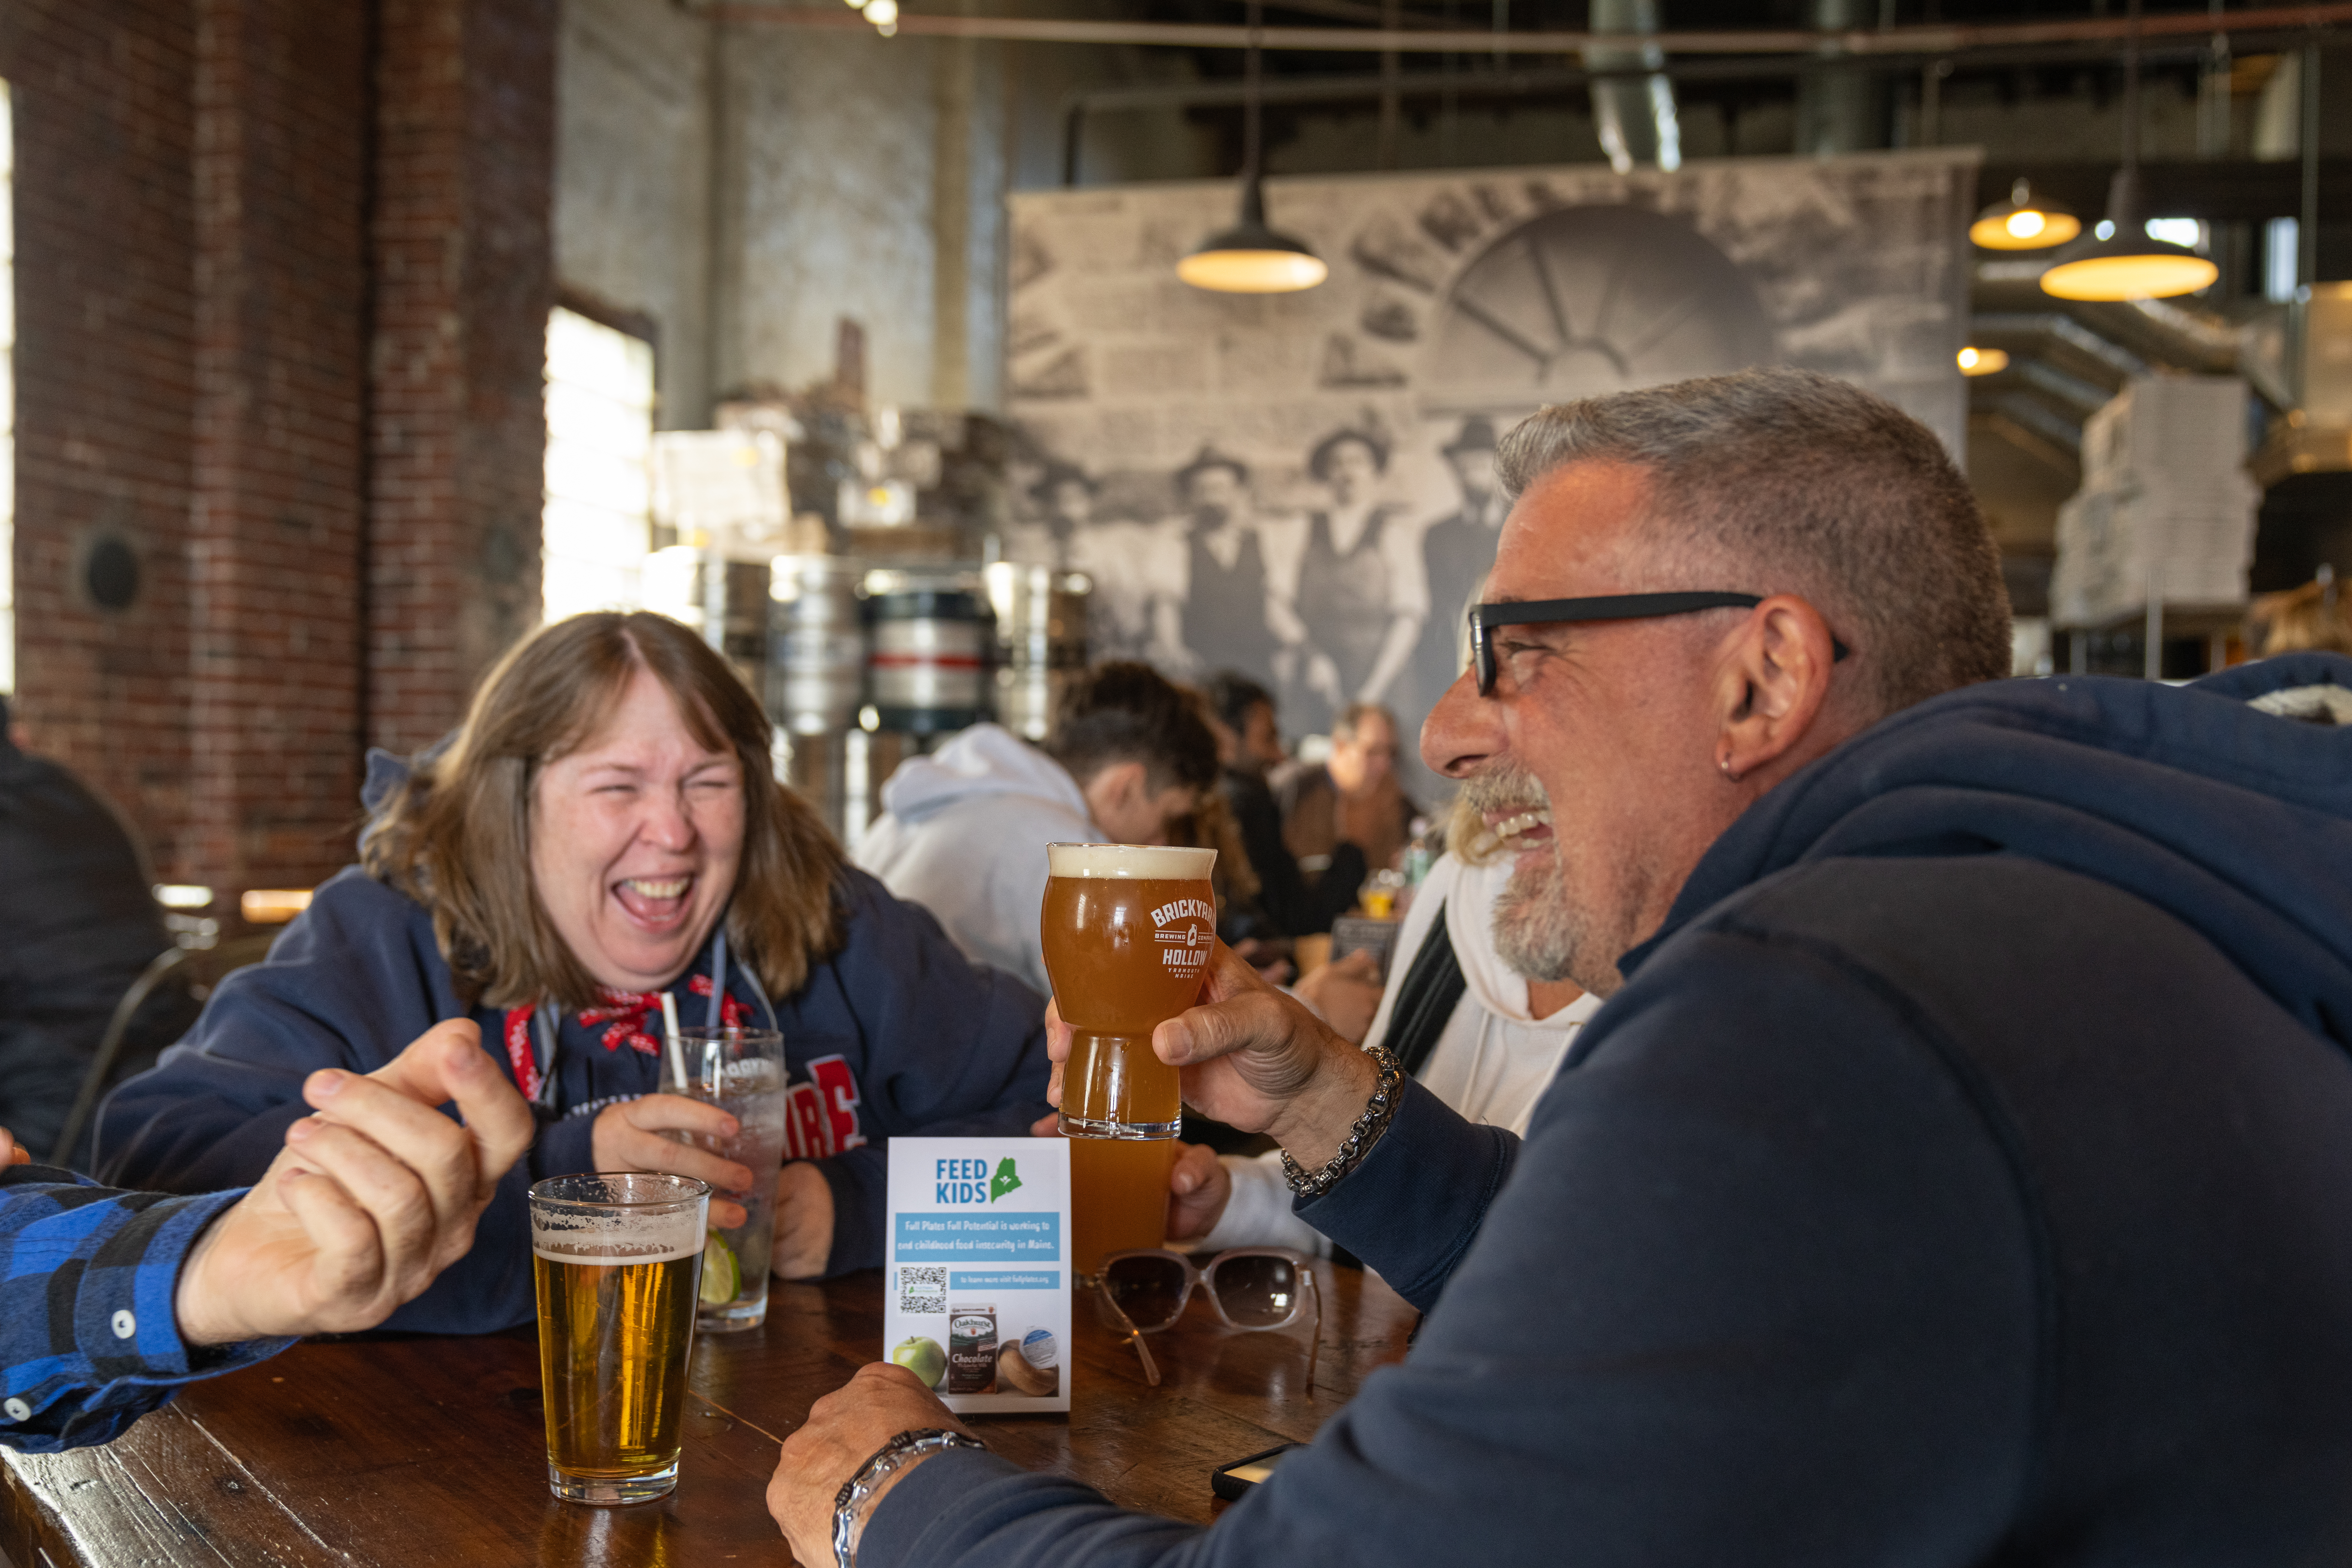 Group of people laughing and drinking Brickyard Hollow craft beer